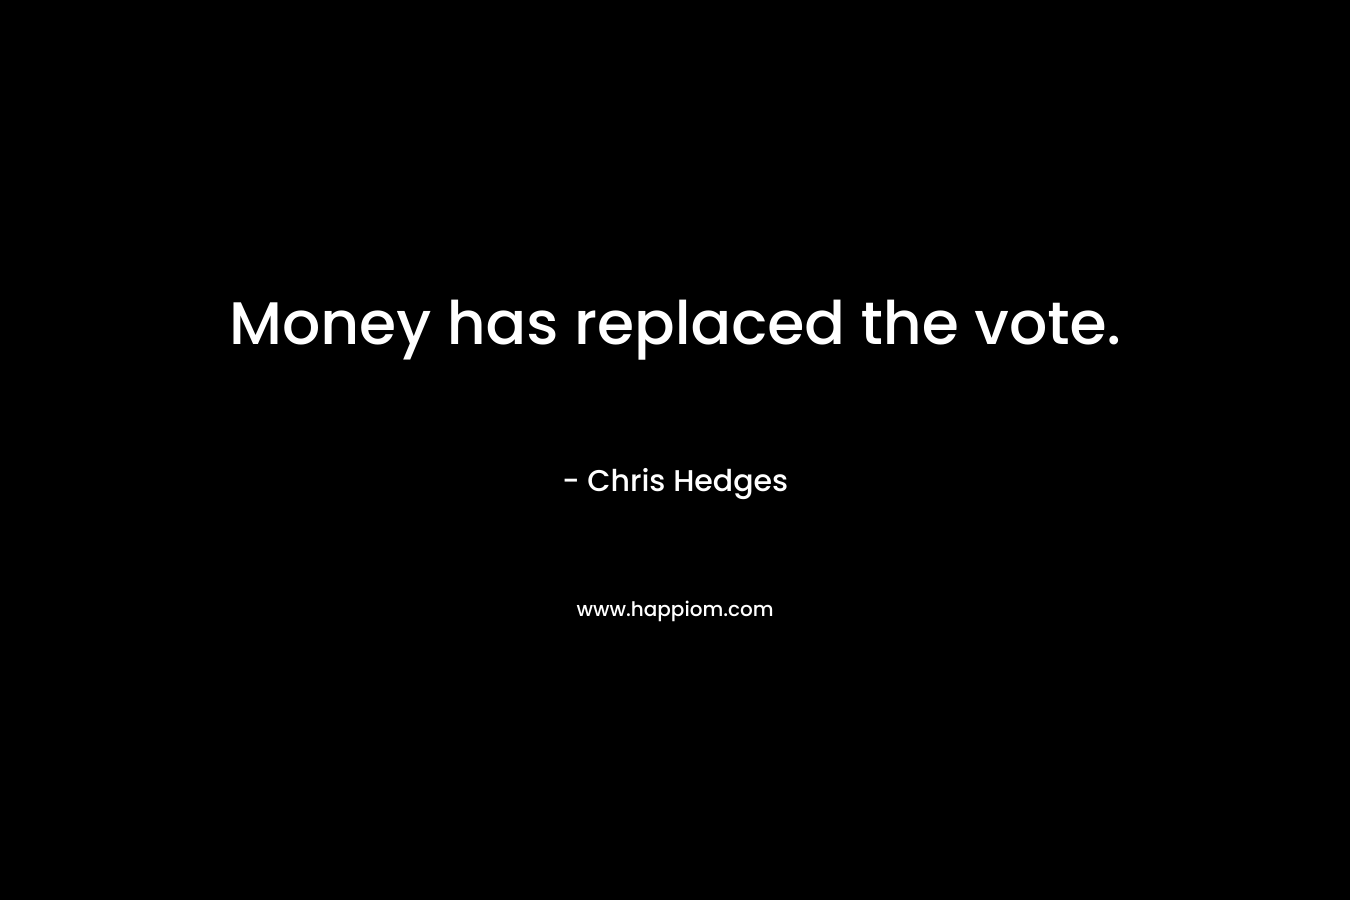 Money has replaced the vote. – Chris Hedges